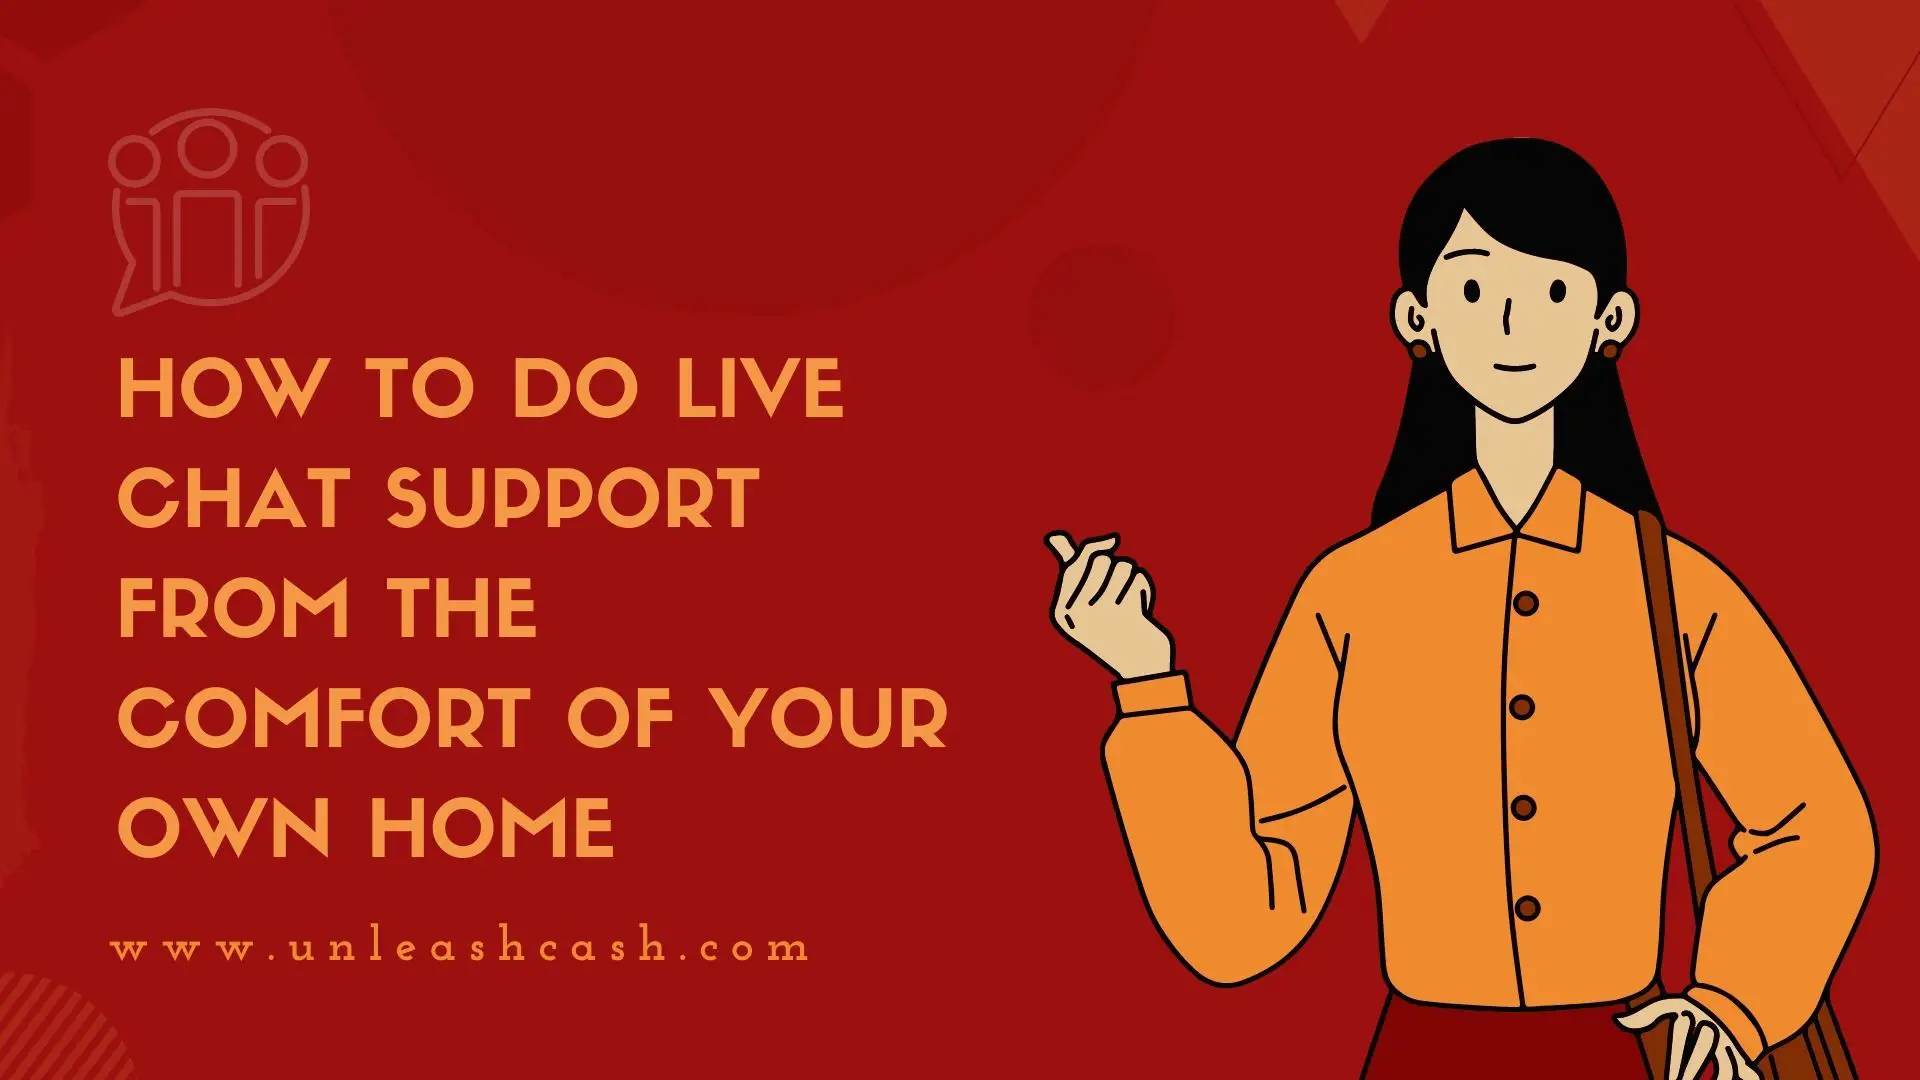 How To Do Live Chat Support From The Comfort Of Your Own Home